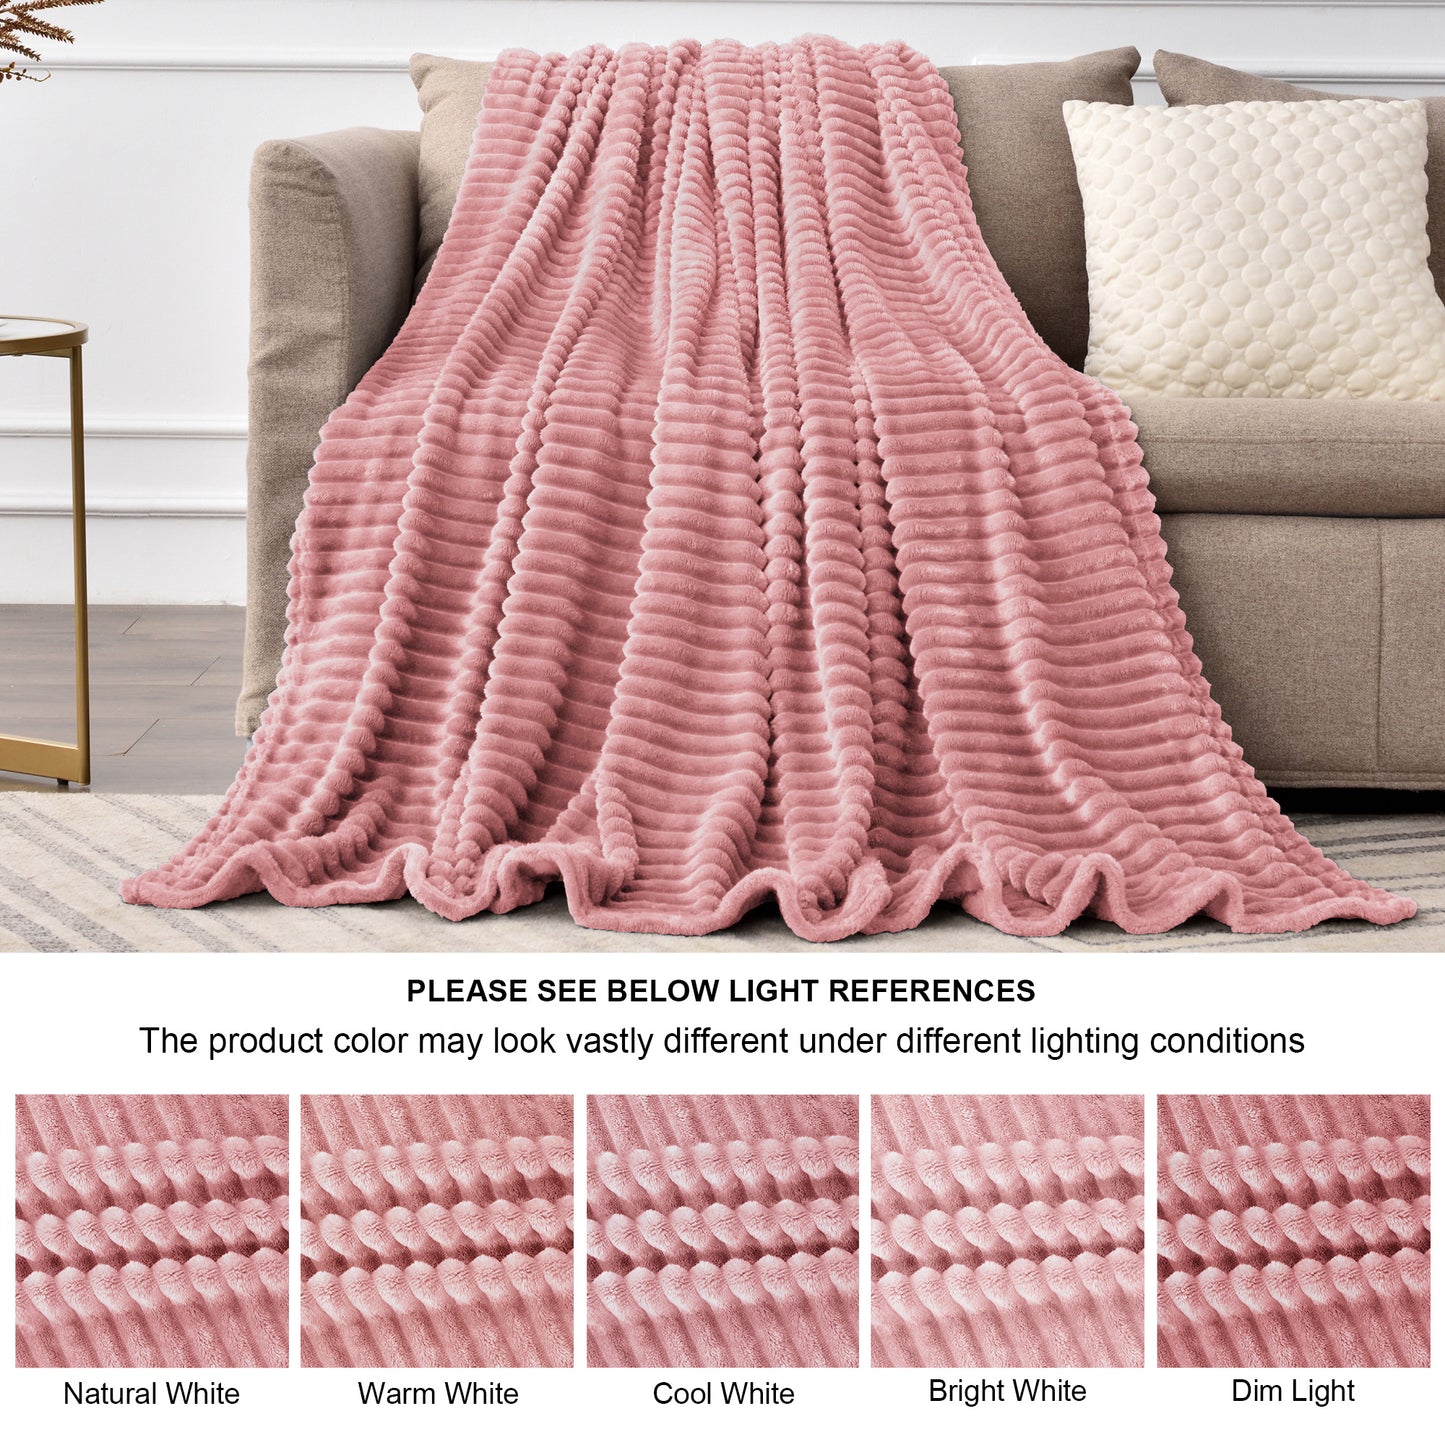 Fleece Blanket Queen Size – 3D Ribbed Jacquard Soft and Warm Decorative Fuzzy Blankets – Cozy, Fluffy, Plush Lightweight Throw Blankets for Couch, Bed, Sofa